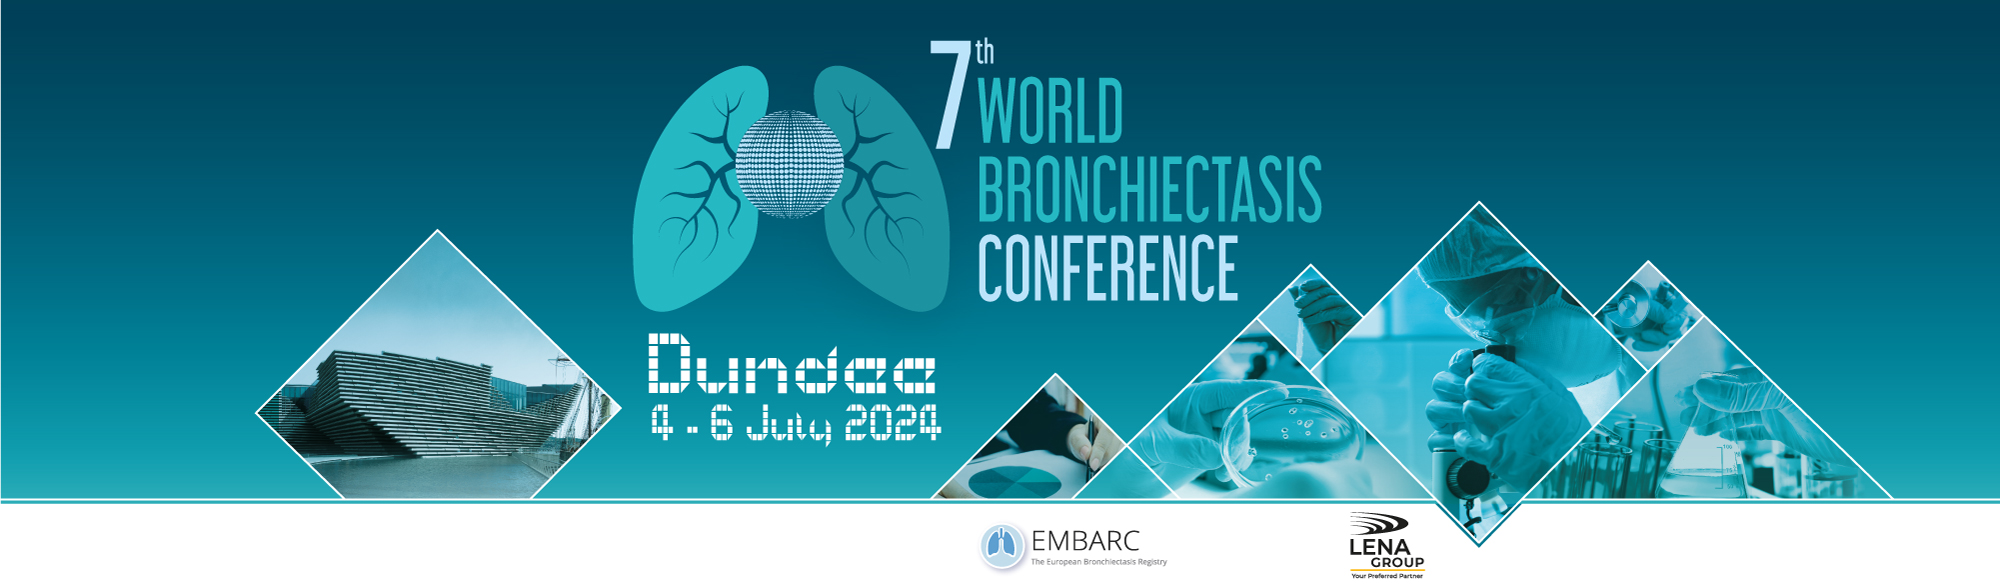 World Bronchiectasis Conference World Bronchiectasis Conference